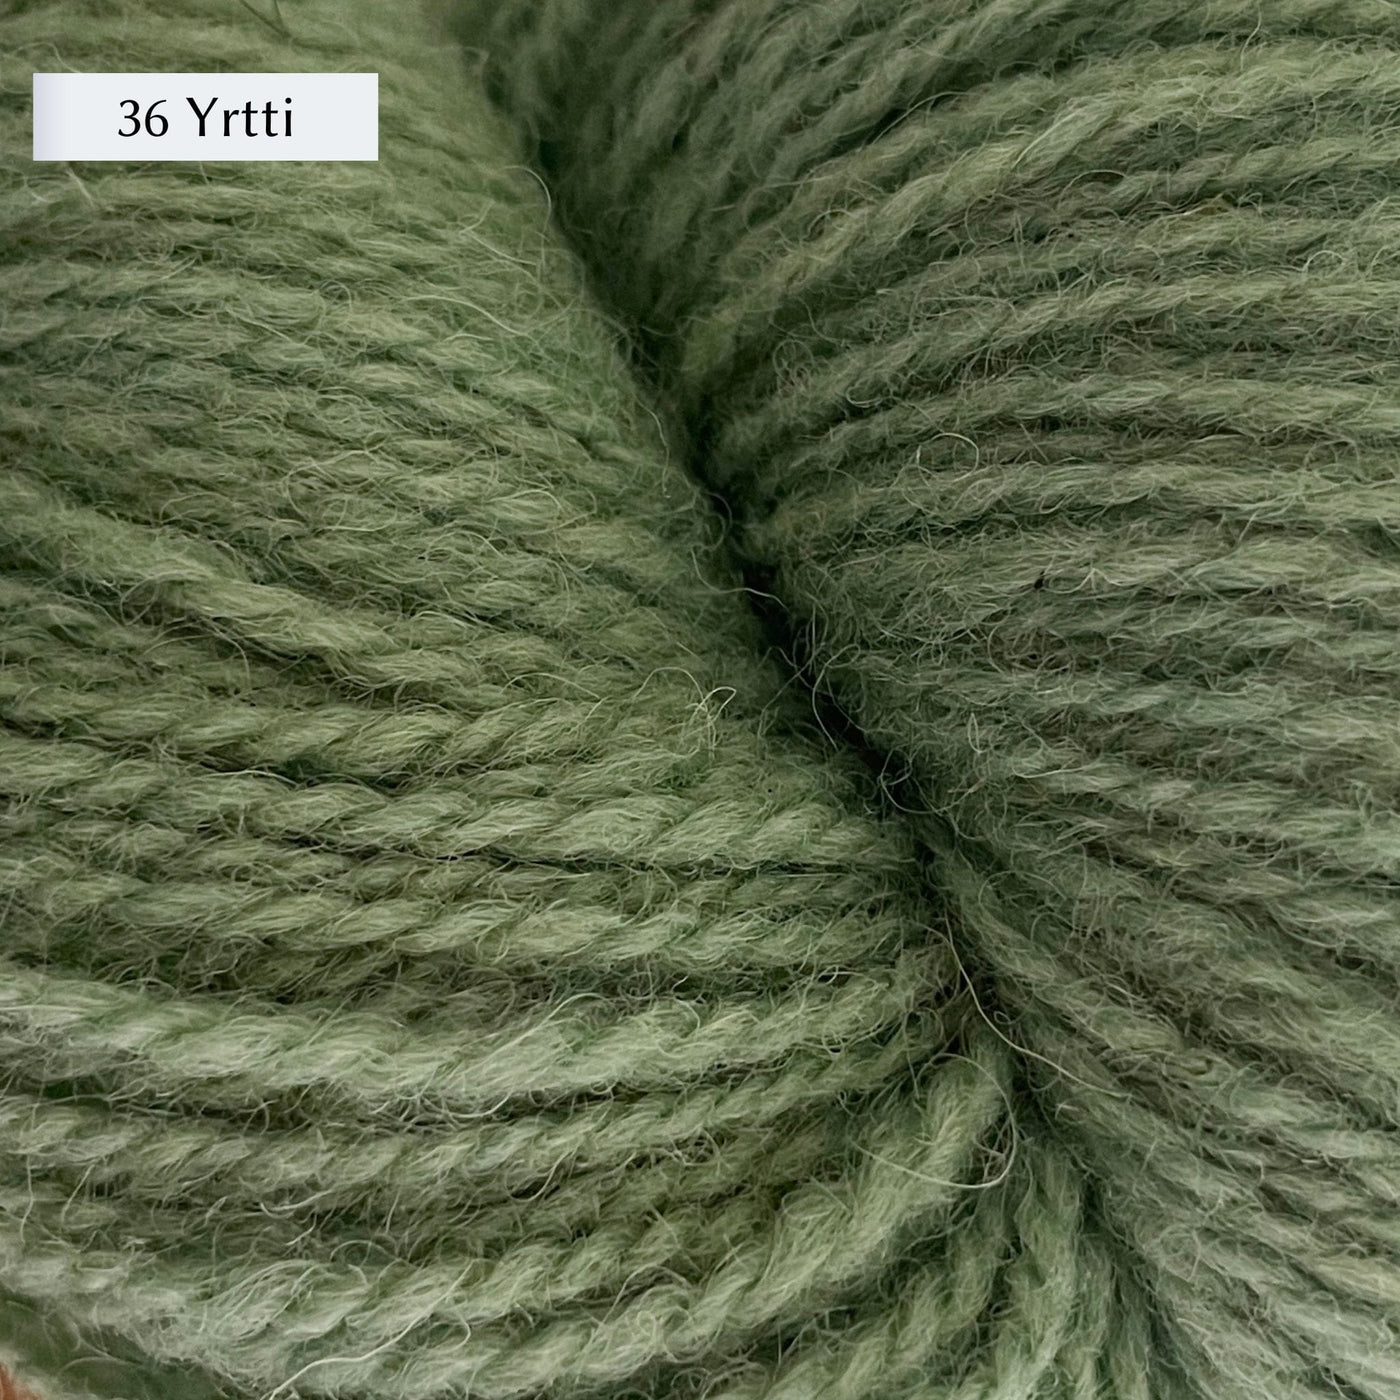 Tukuwool DK Yarn, 100% Finnish Wool shown in colorway  36 Yrtti which is a muted light green color. 